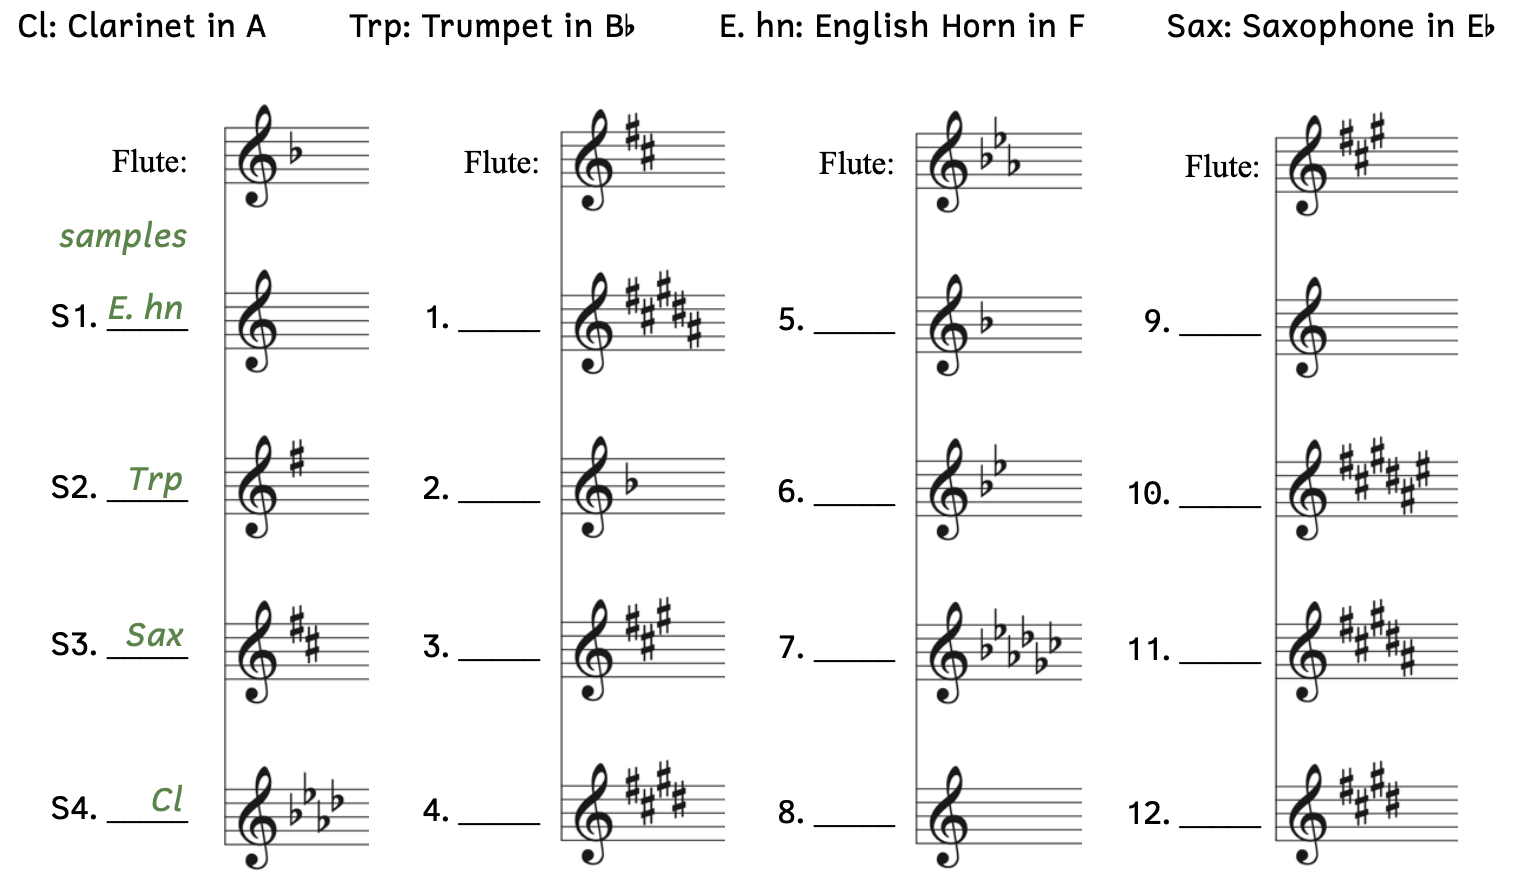 Column 1 shows the flute's key signature of 2 sharps. Number 1 has 5 sharps. Number 2 has 1 flat. Number 3 has 3 sharps. Number 4 has 4 sharps. Column 2 shows the flute's key signature of 3 flats. Number 5 has 1 flat. Number 6 has 2 flats. Number 7 has 6 flats. Number 8 has no sharps or flats. Column 3 shows the flute's key signature of 3 sharps. Number 9 has no sharps or flats. Number 10 has 6 sharps. Number 11 has 5 sharps. Number 12 has 4 sharps.